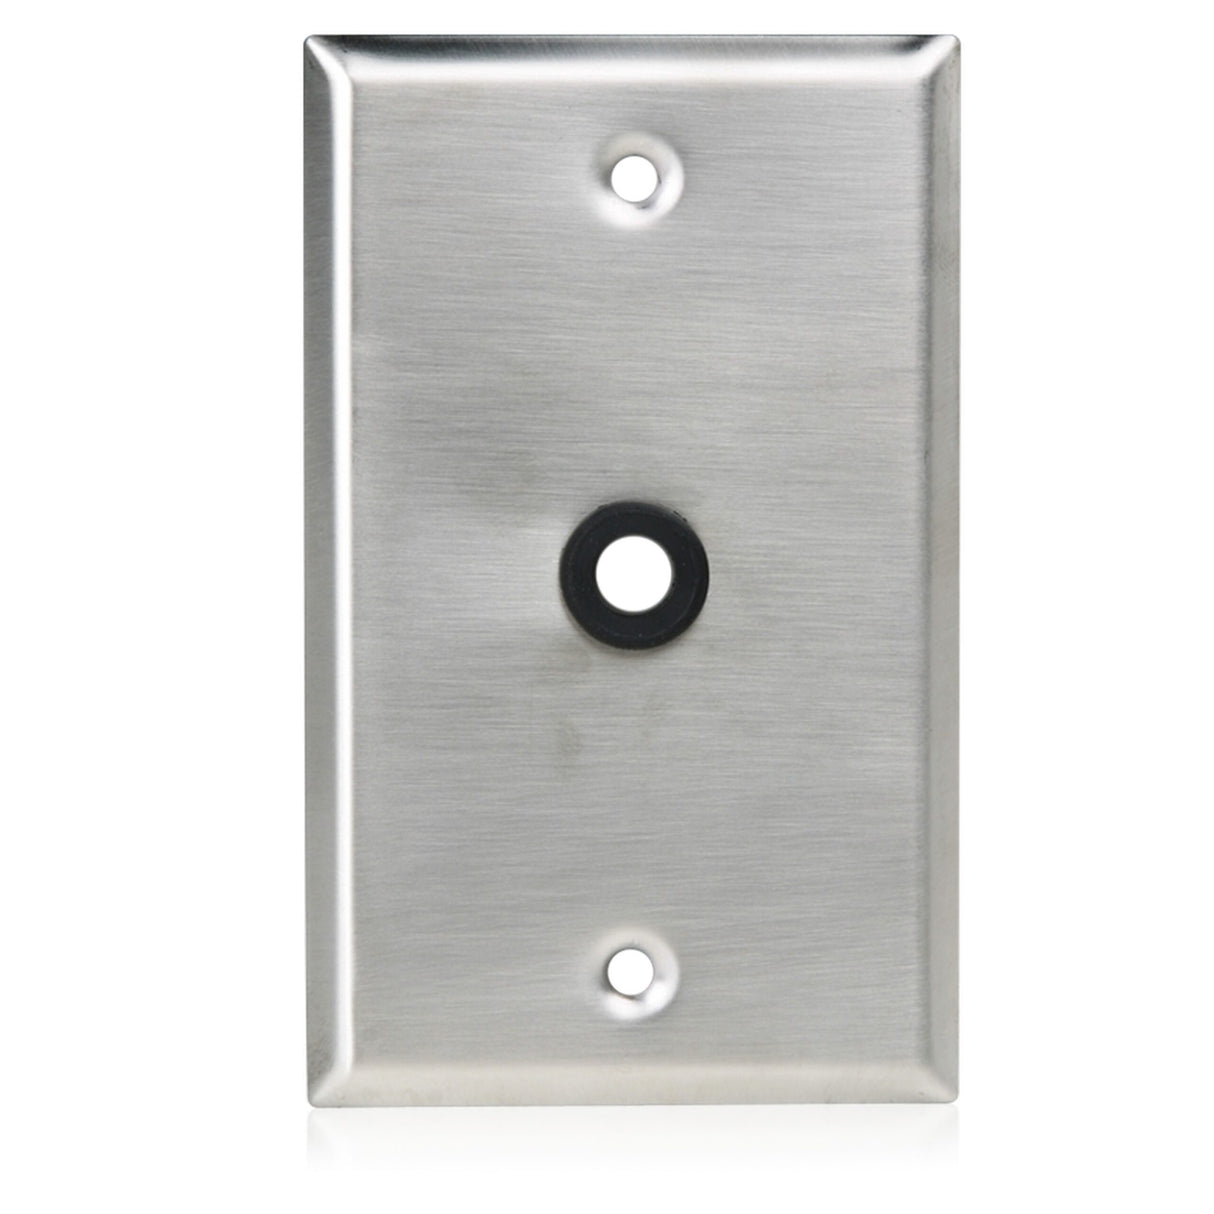 Atlas Sound SG-38GH Single Gang Stainless Steel Plate, 3/8 Inch Hole and Grommet